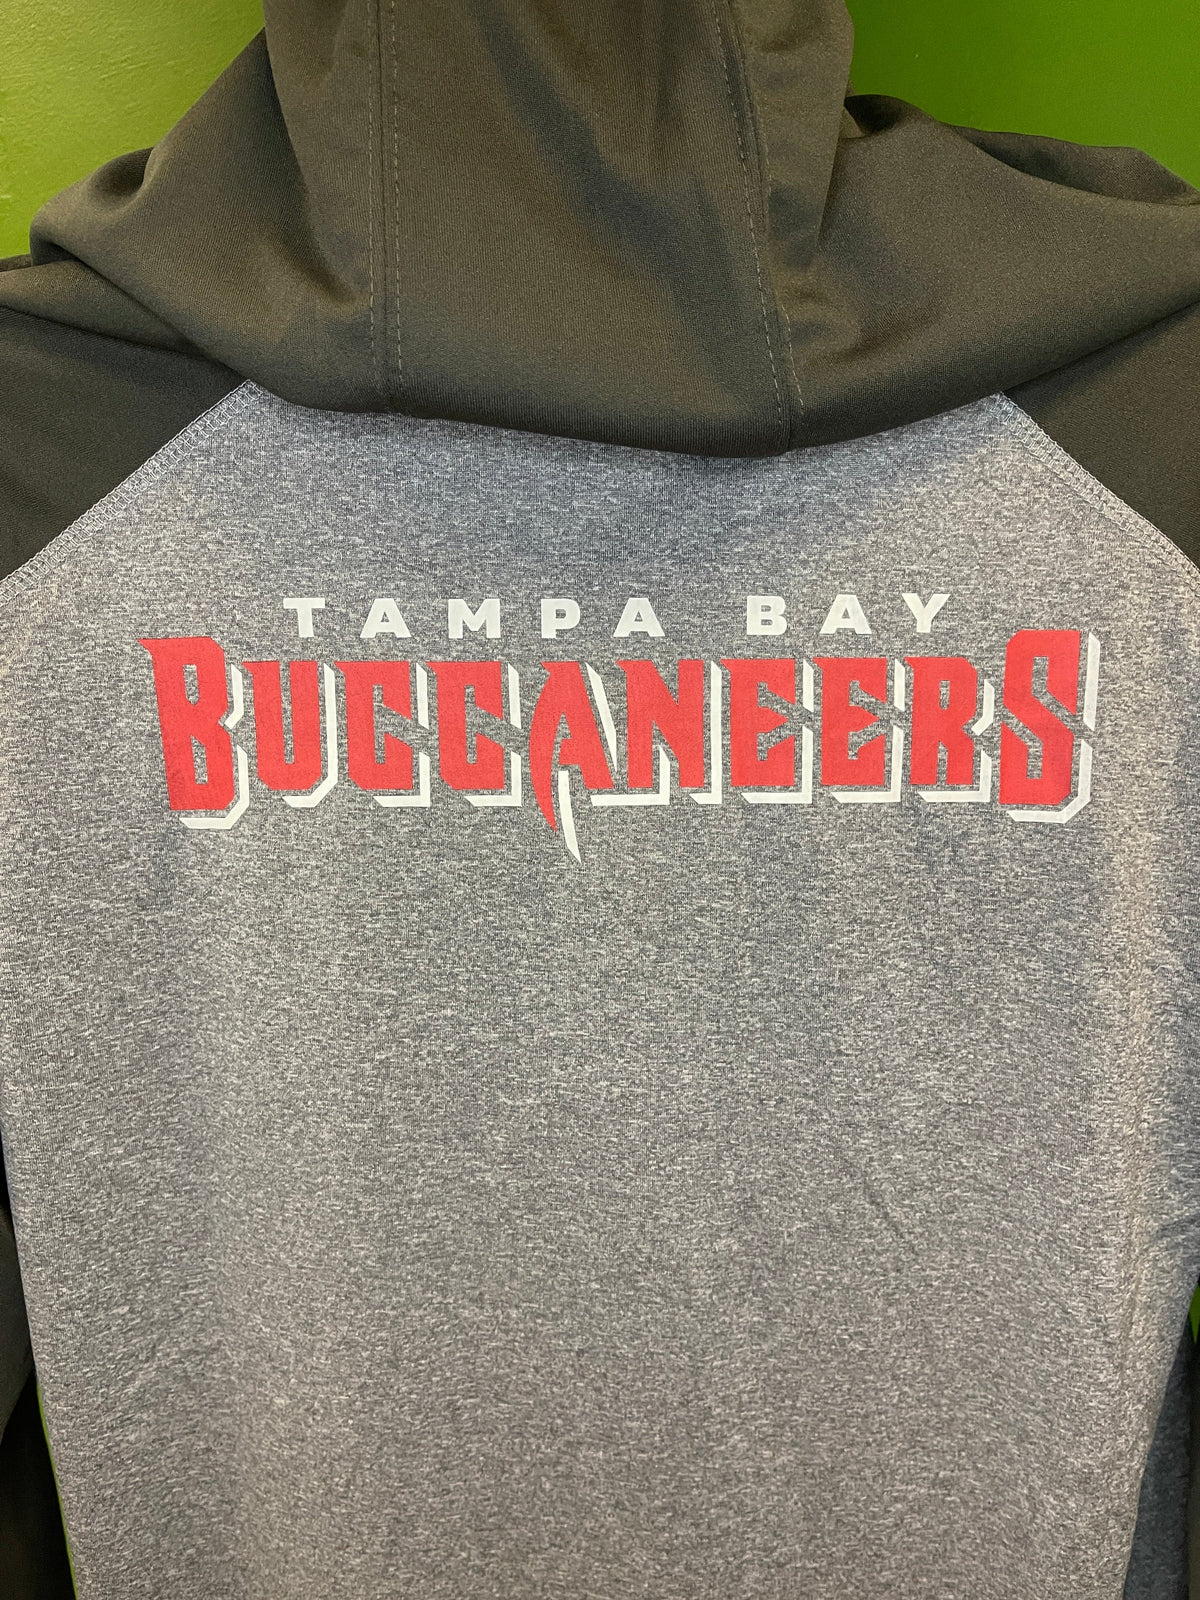 NFL Tampa Bay Buccaneers 1/4 Zip Hooded L/S T-Shirt Men's Small NWT